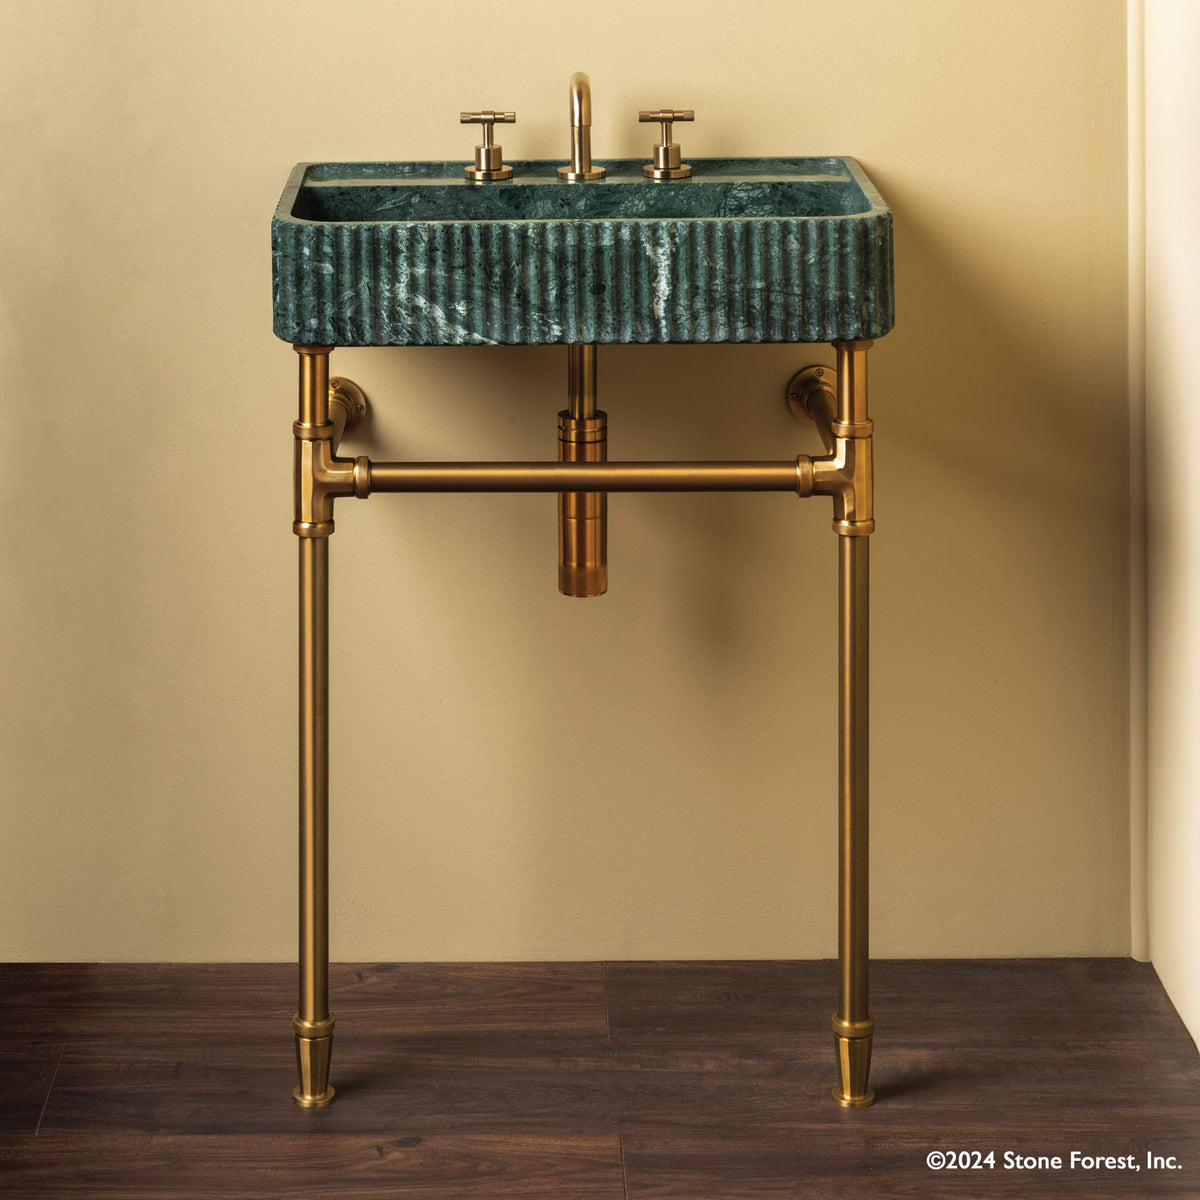 Fluted Lumbre Bath Sink carved from Verde Indio Marble on top of an Aged Brass  Elemental  Facet Crossbar Stand image 1 of 4